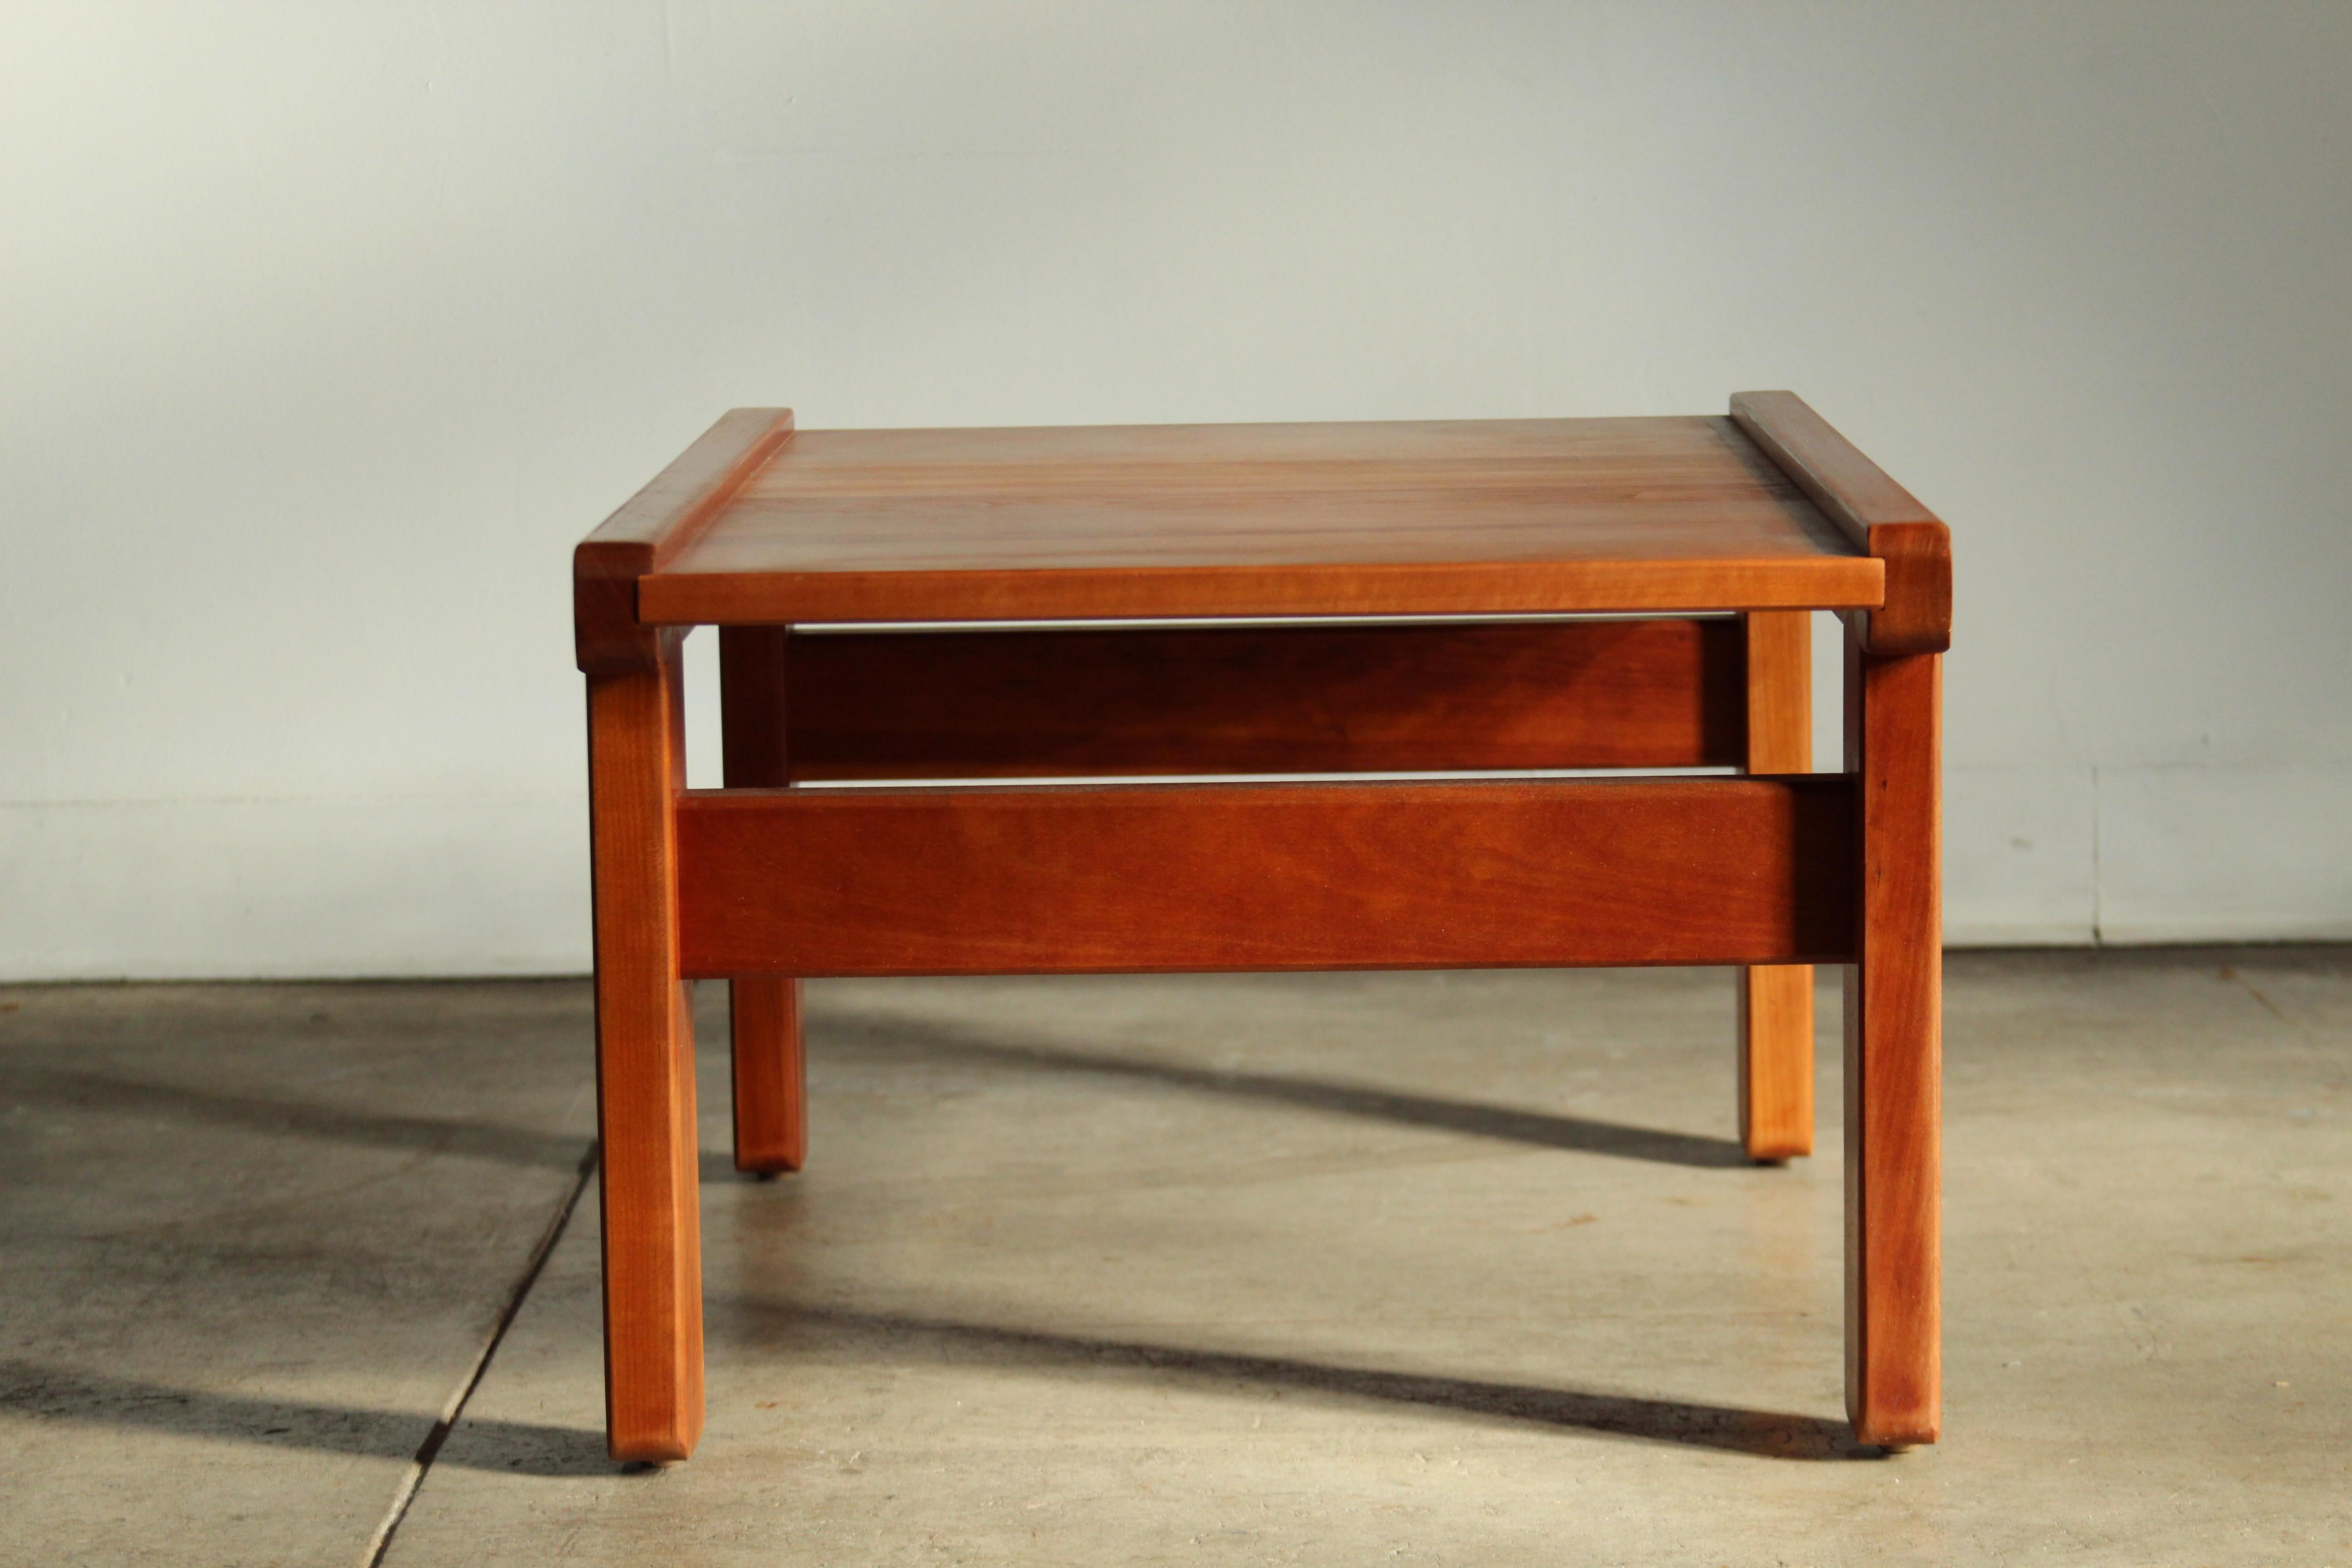 Japanese Studio Crafted Low Table, 1970s For Sale 5